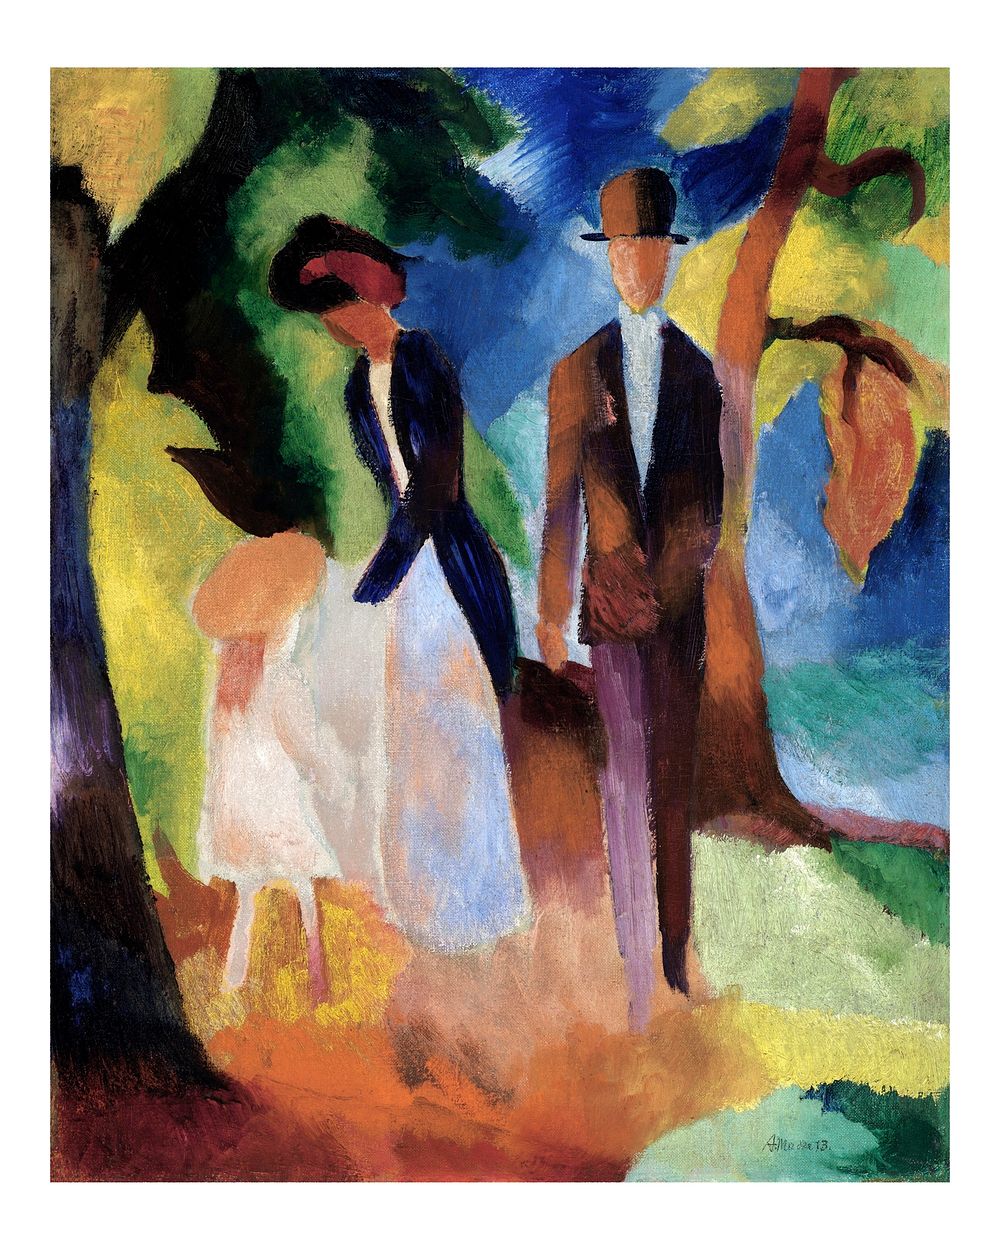 Expressionism art print by August Macke, People by a Blue Lake, vintage illustration